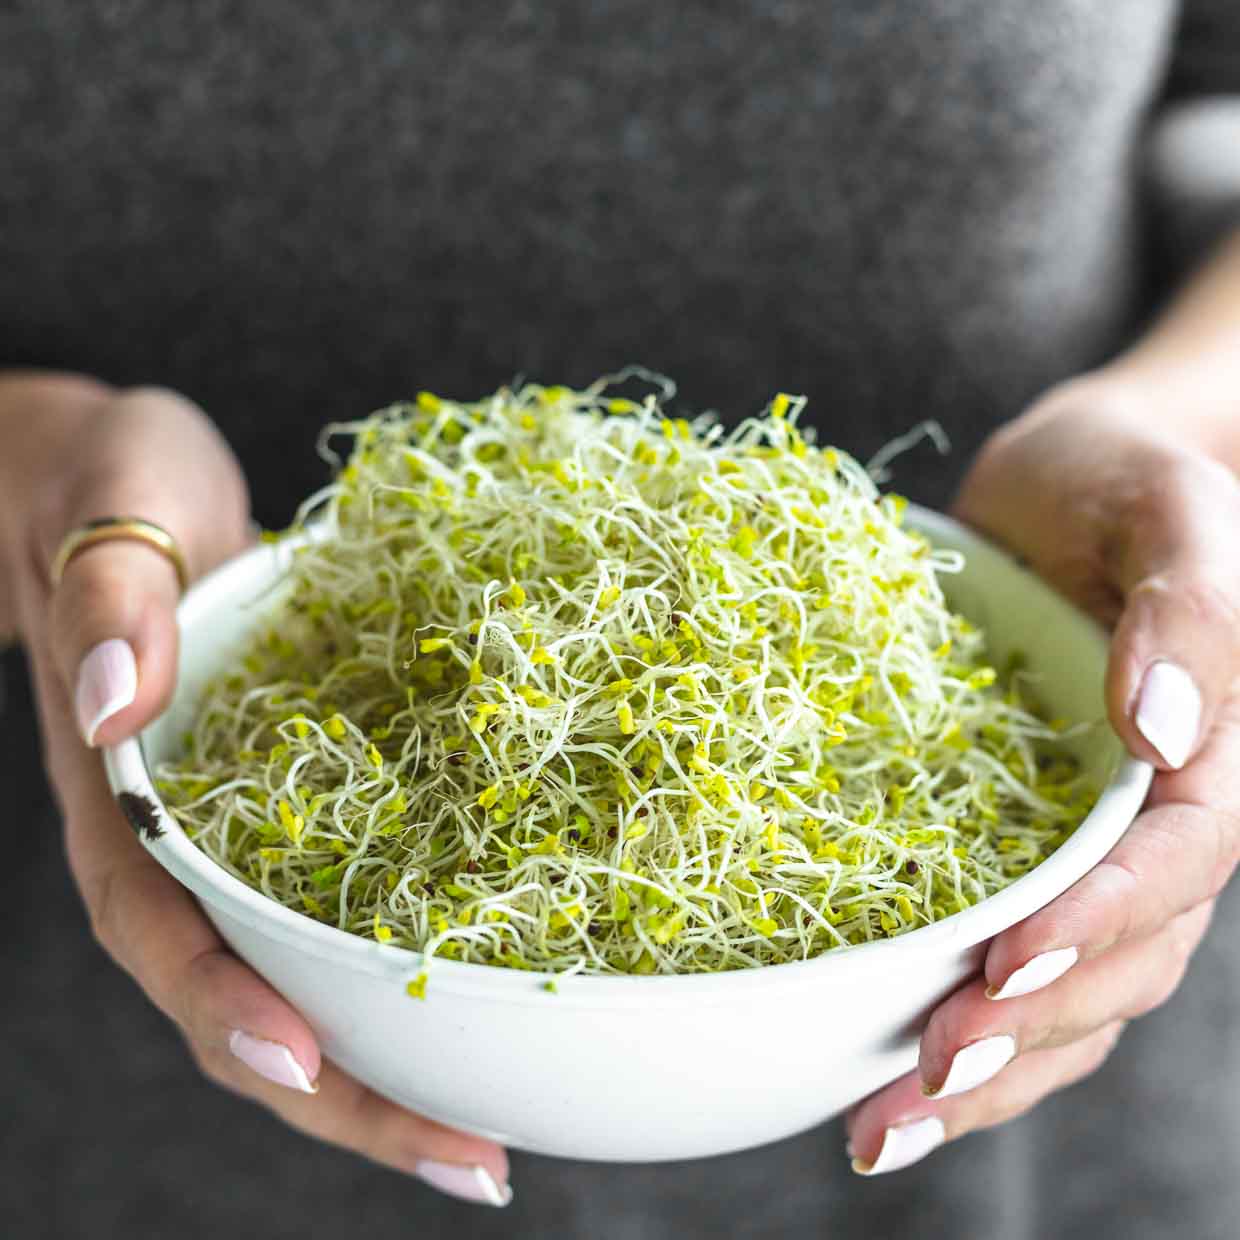 A woman holding a bowl of sprouts.